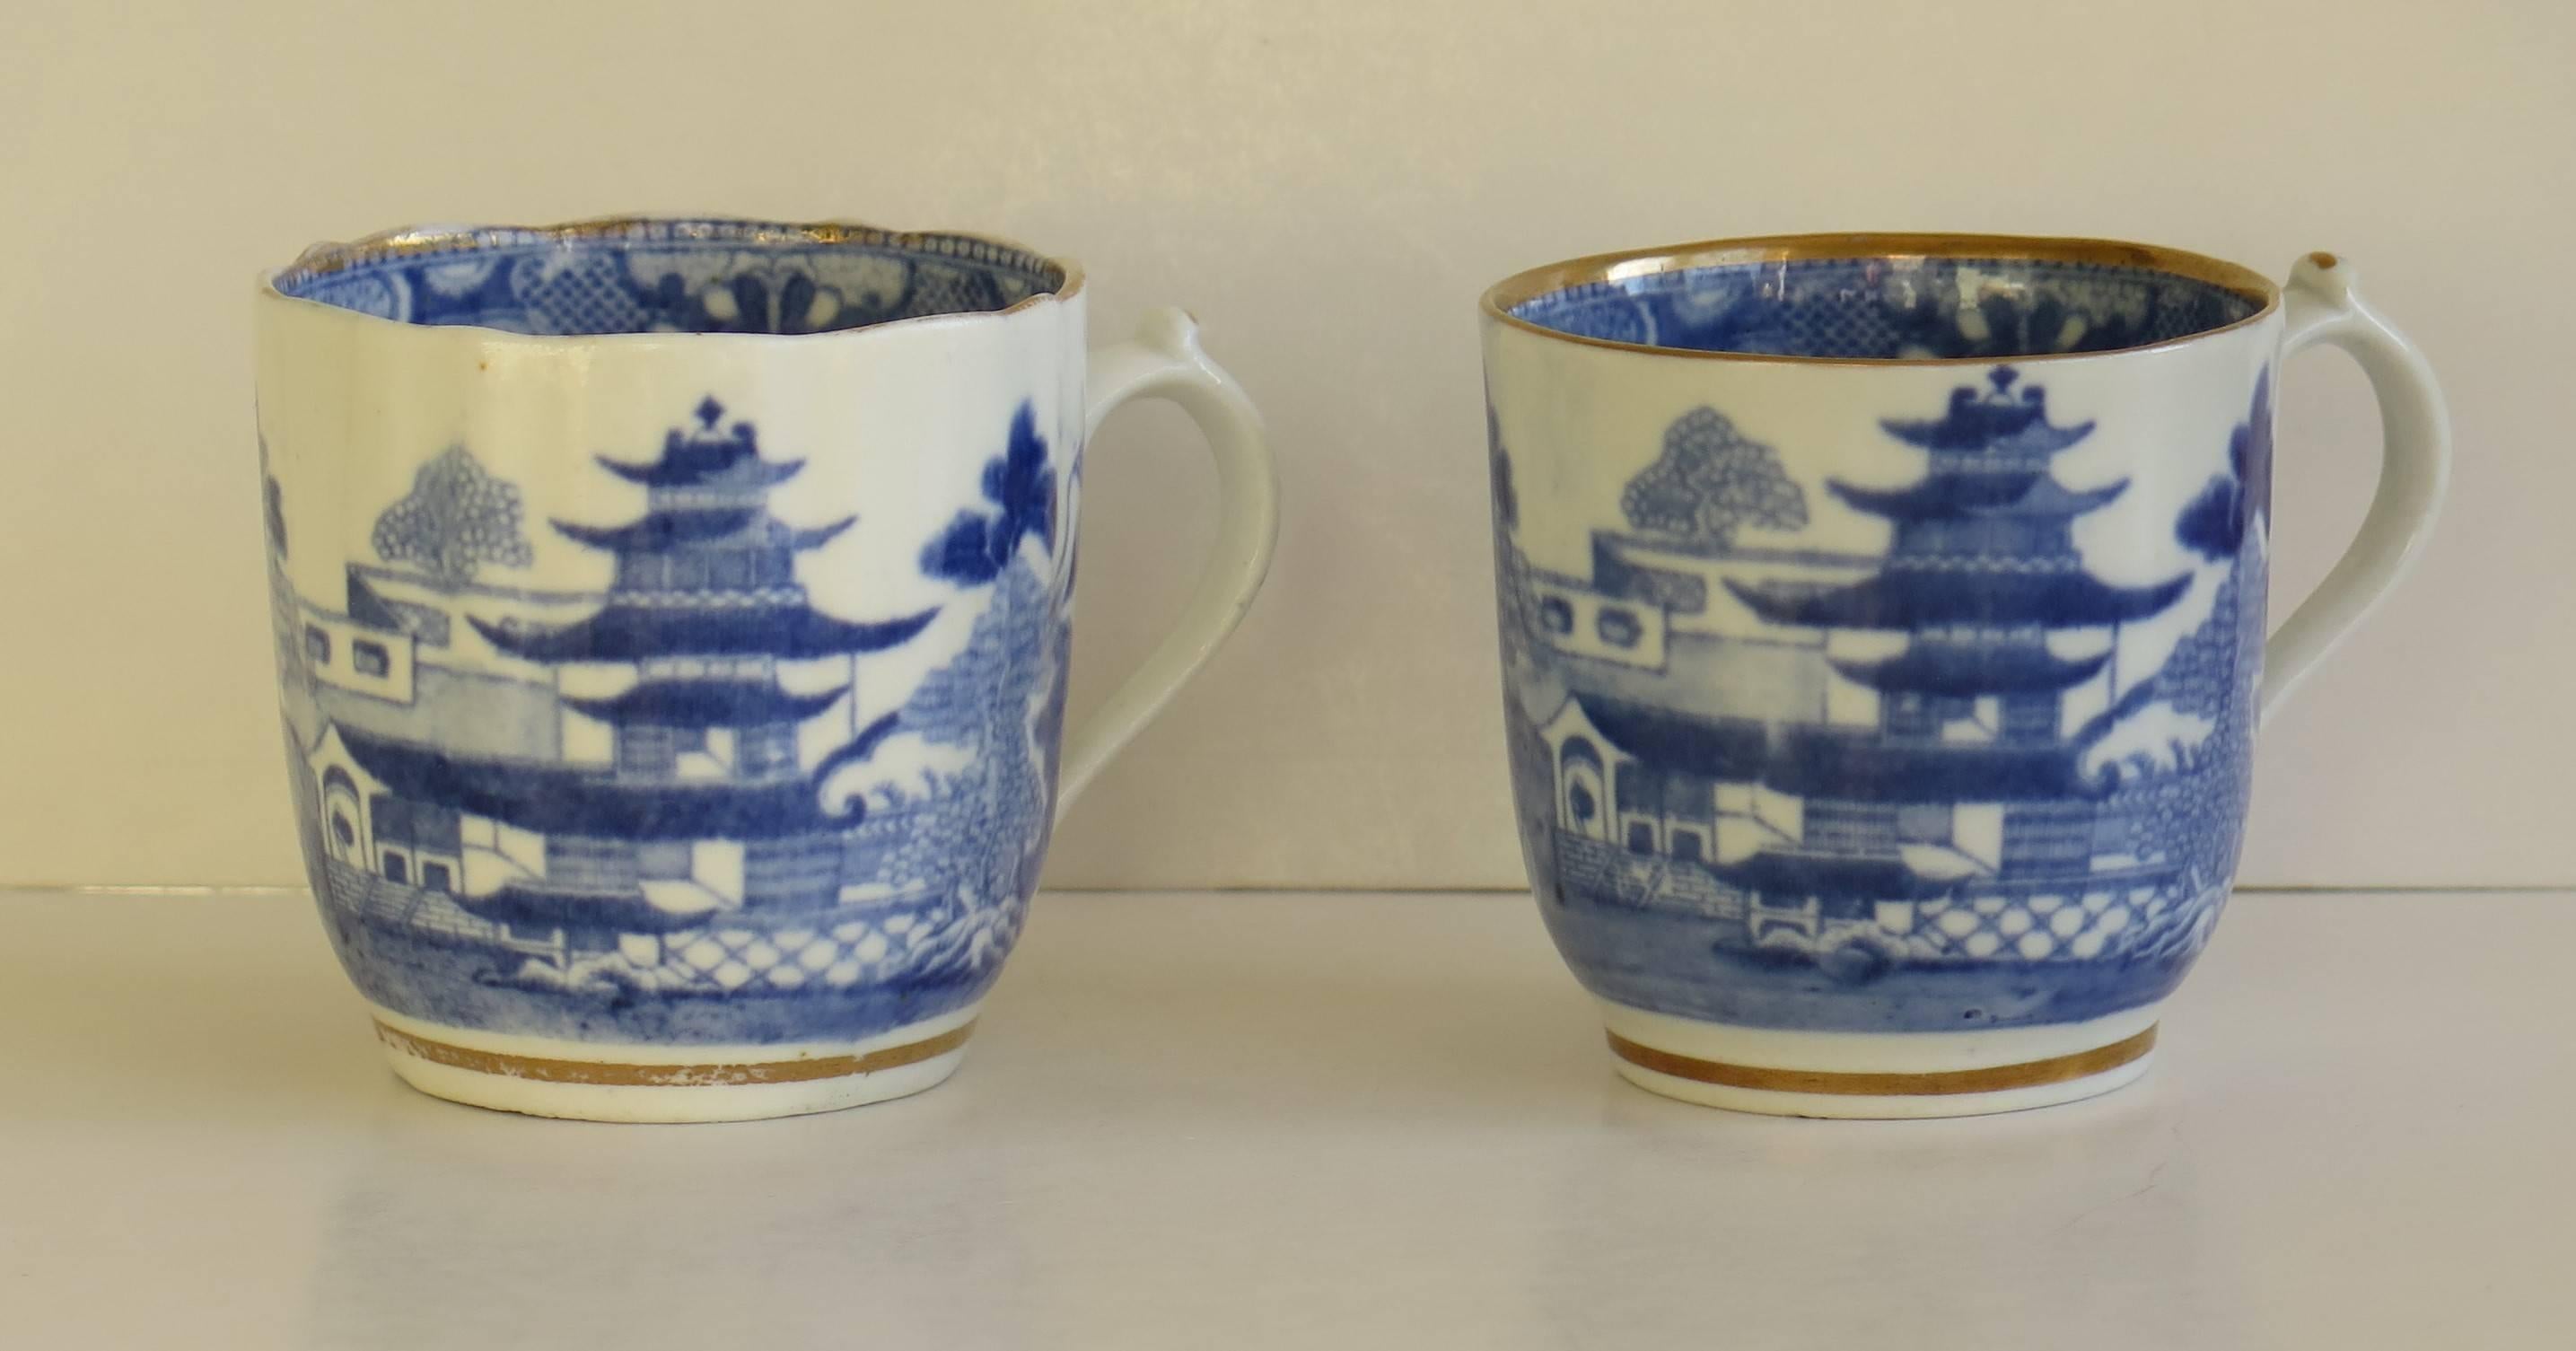 Both of these porcelain coffee cans were made by Miles Mason (Mason's), Staffordshire potteries, England around the turn of the 18th century. 

They are very similar, both of a butte shape on a small foot with loop handles having the distinctive